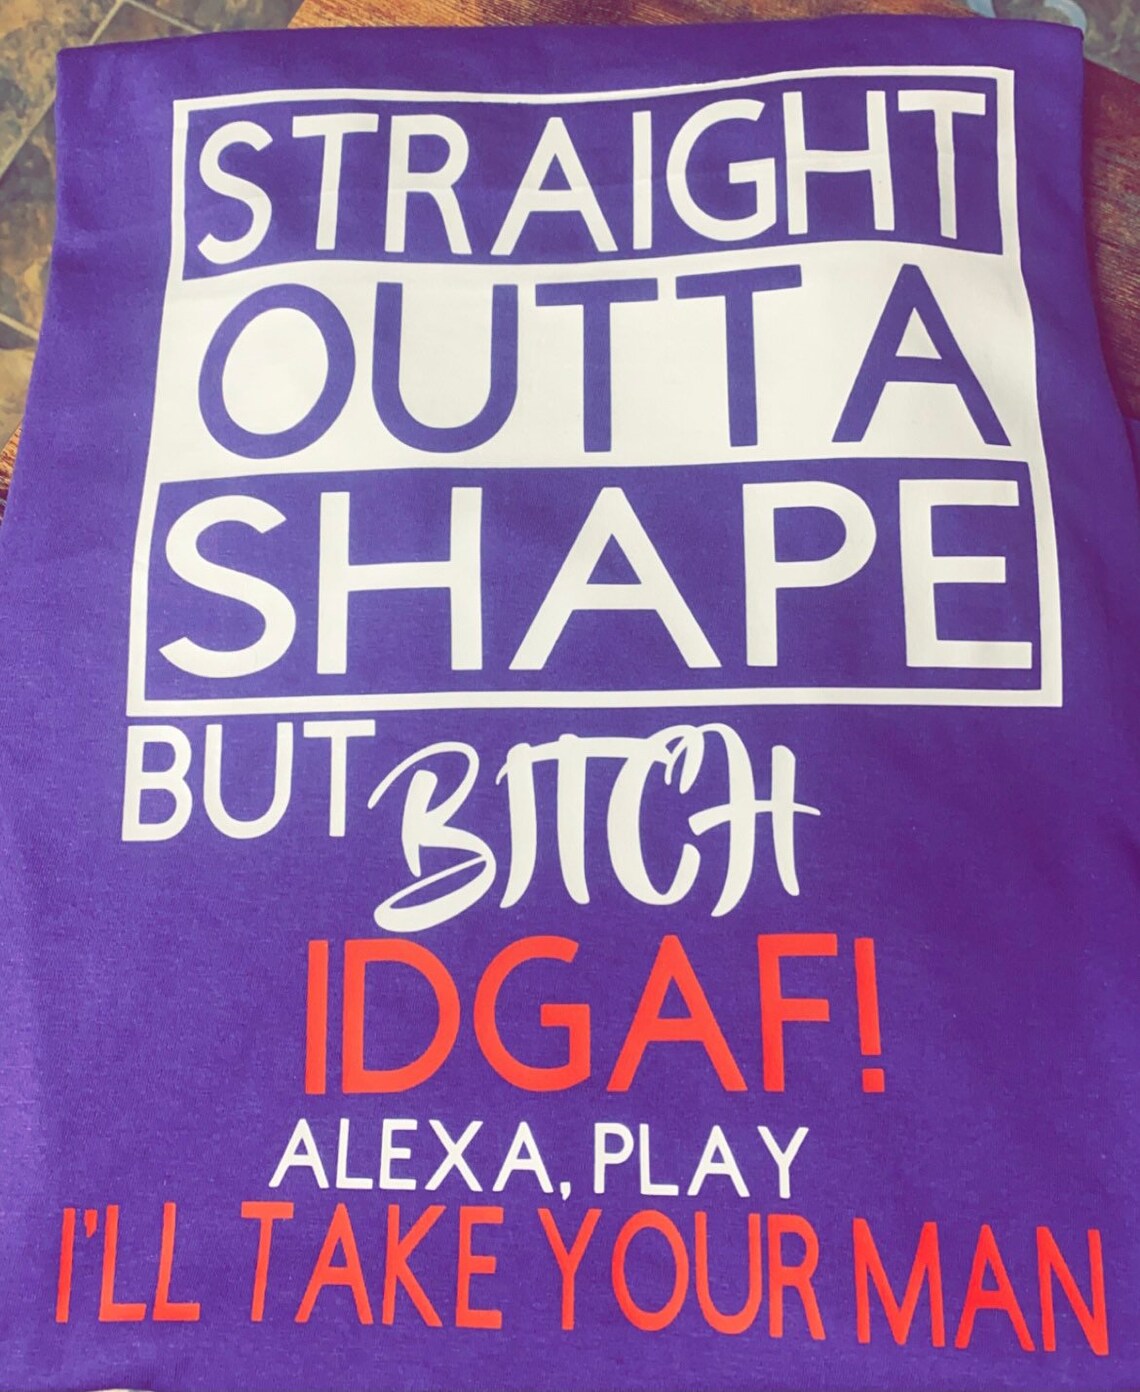 Straight outta shape but Idgaf outta shape Ill take your | Etsy